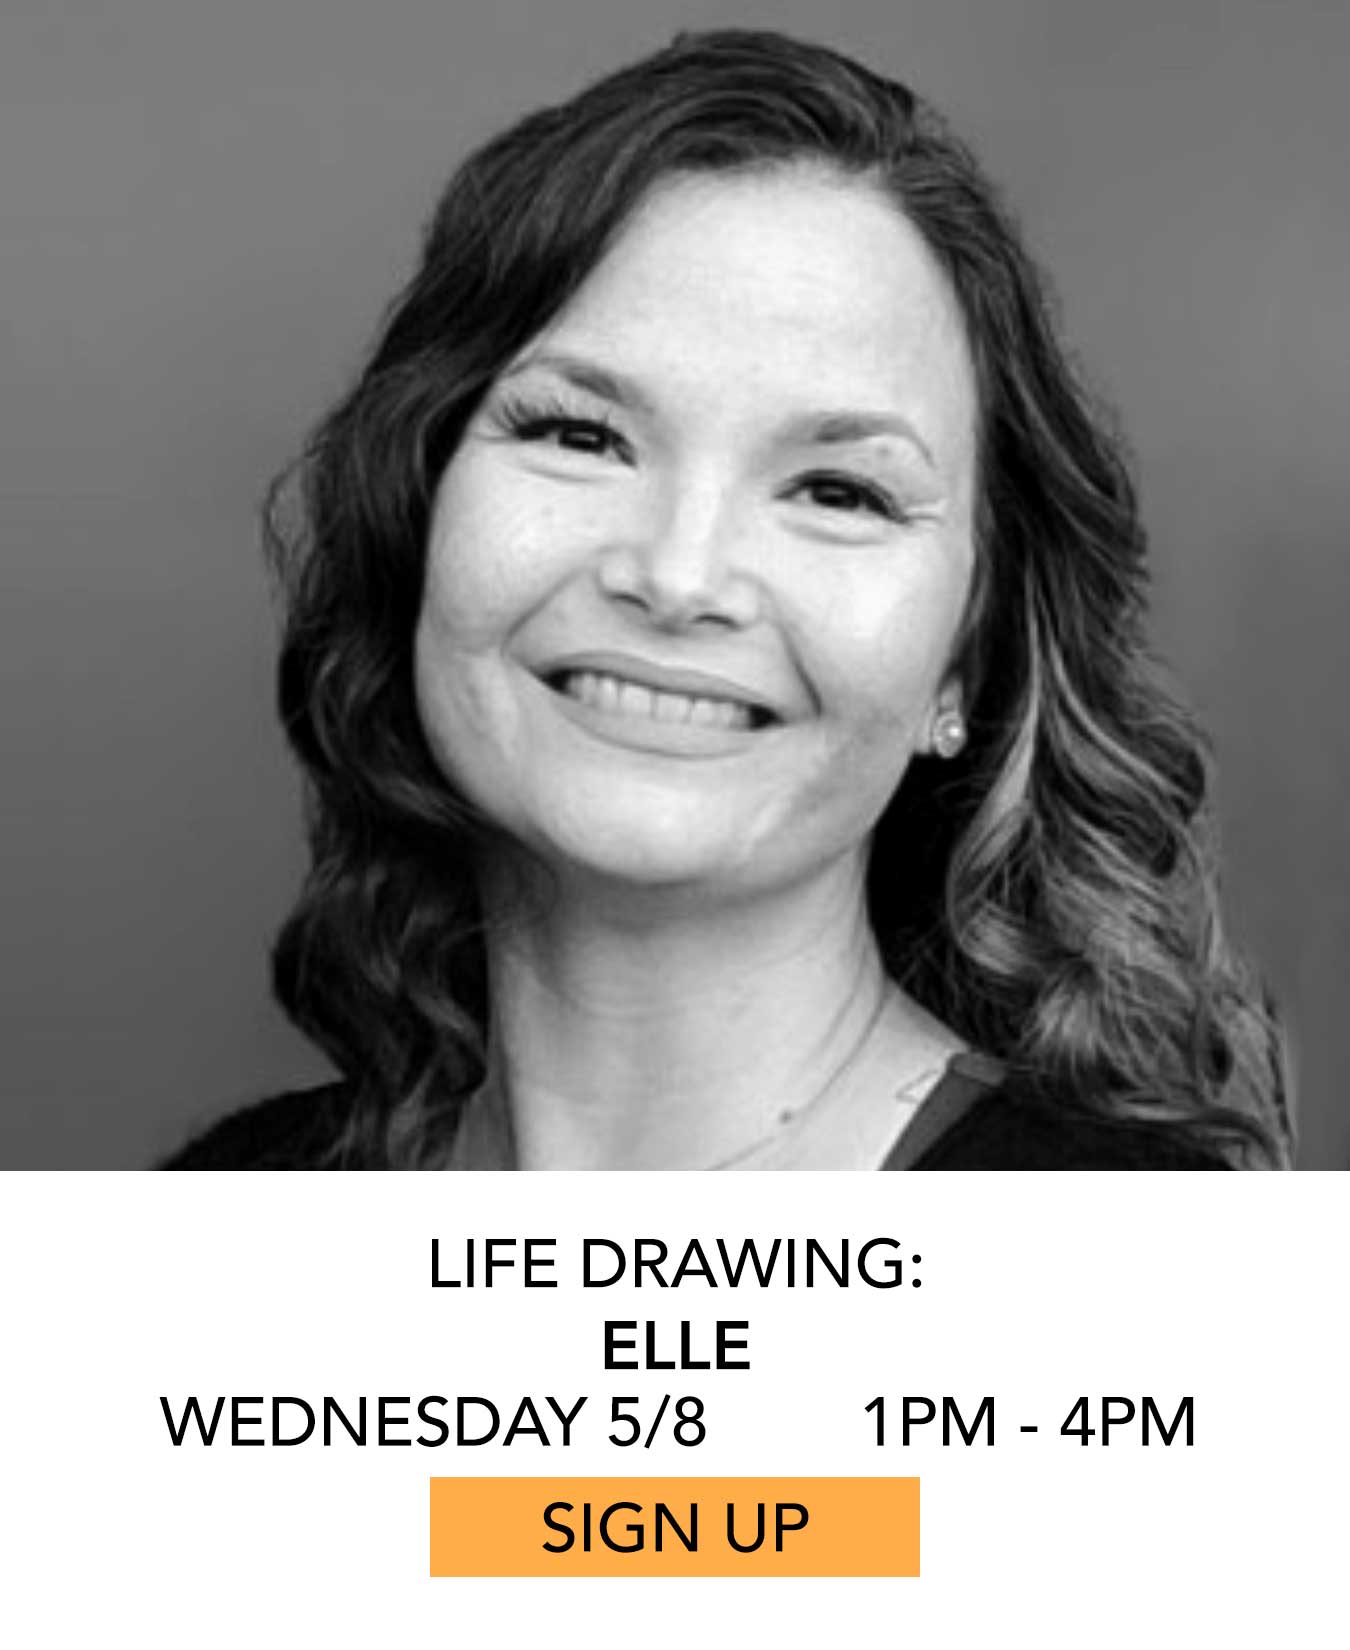 Life Drawing: Elle. Wednesday 5/8 from 1pm to 4pm. Click to Sign Up.